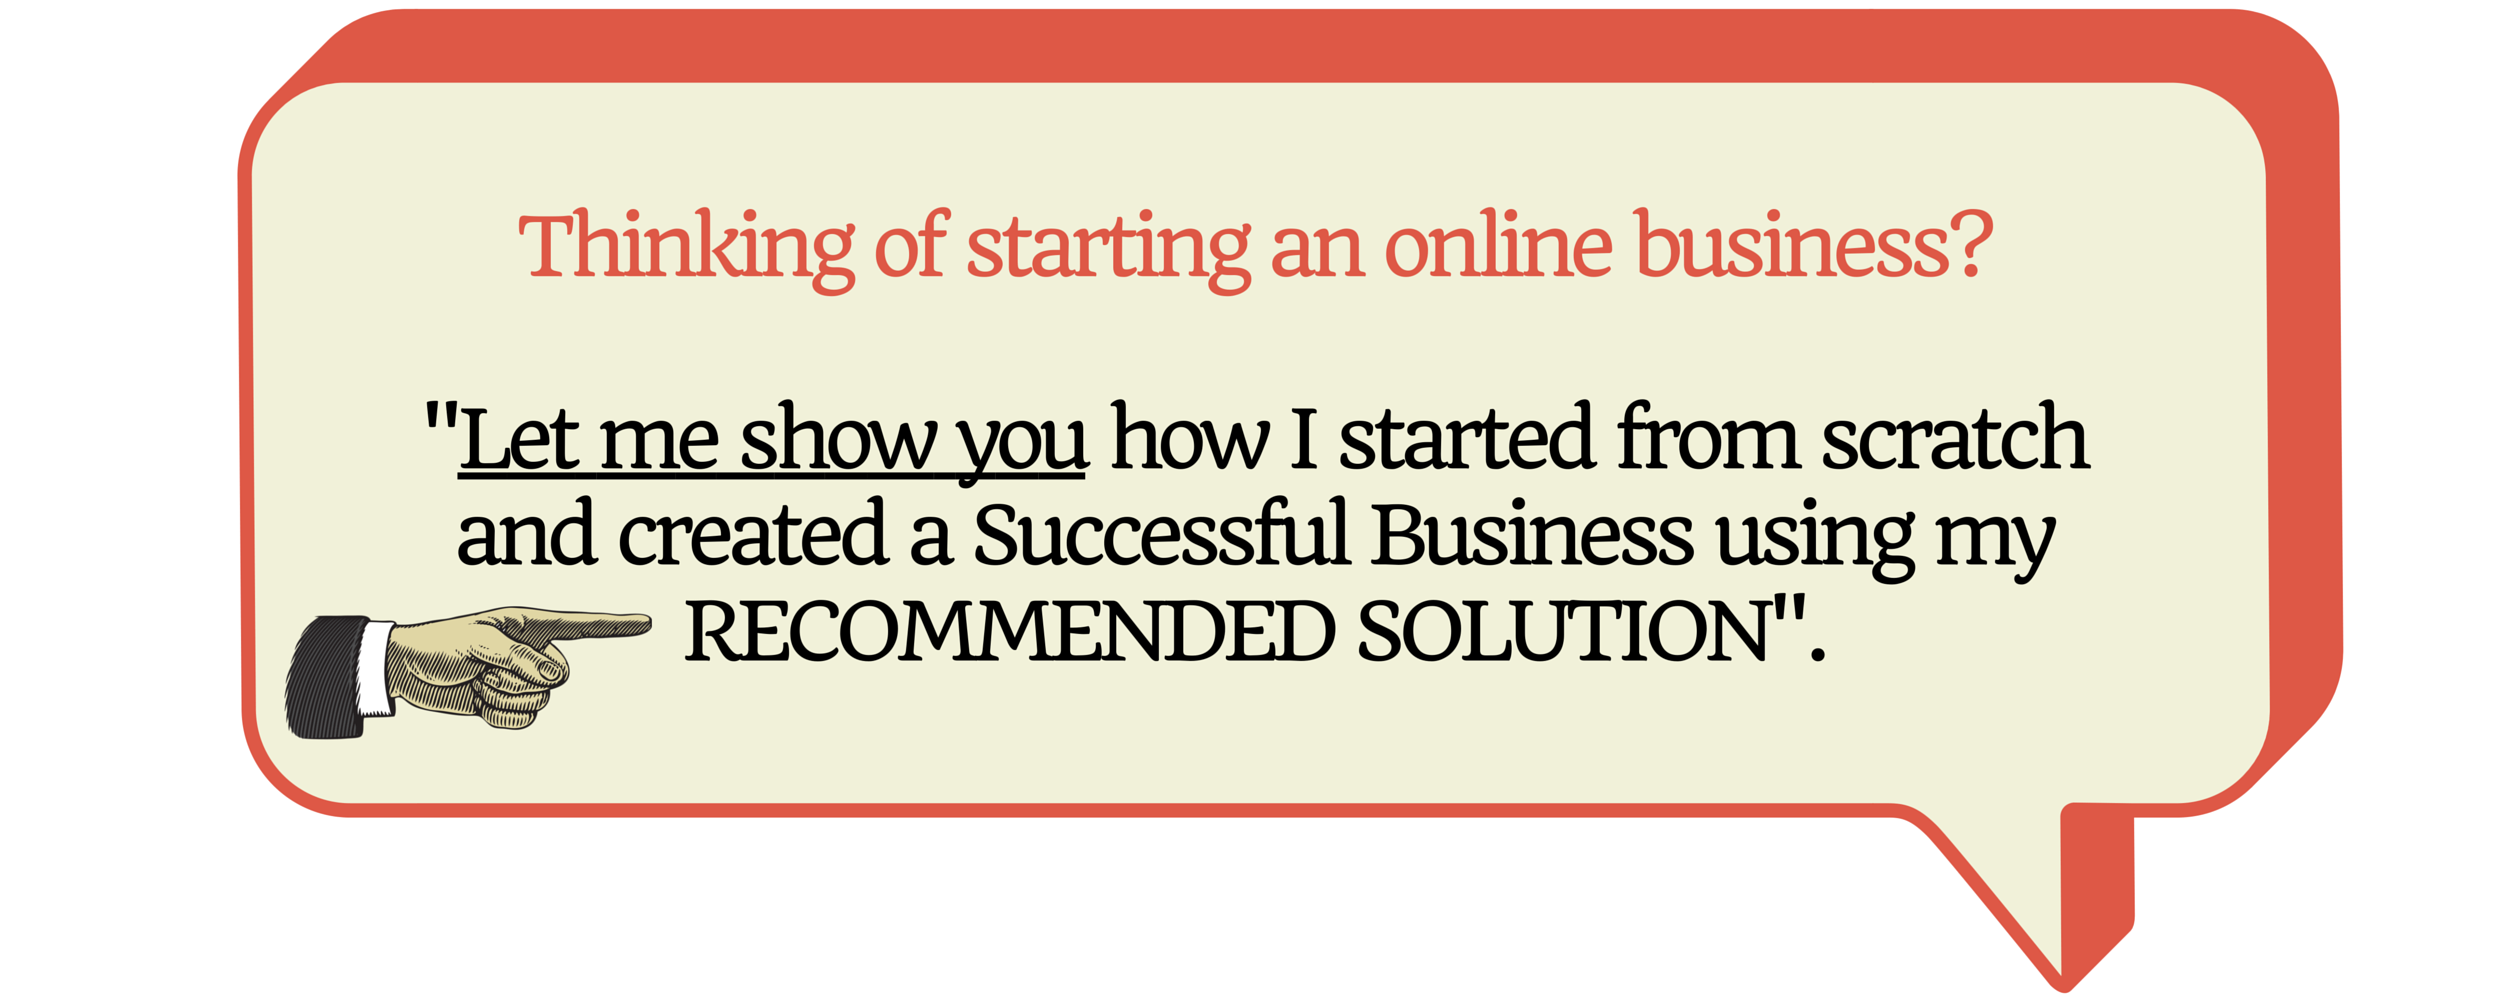 Thinking-of-starting-an-online-business-